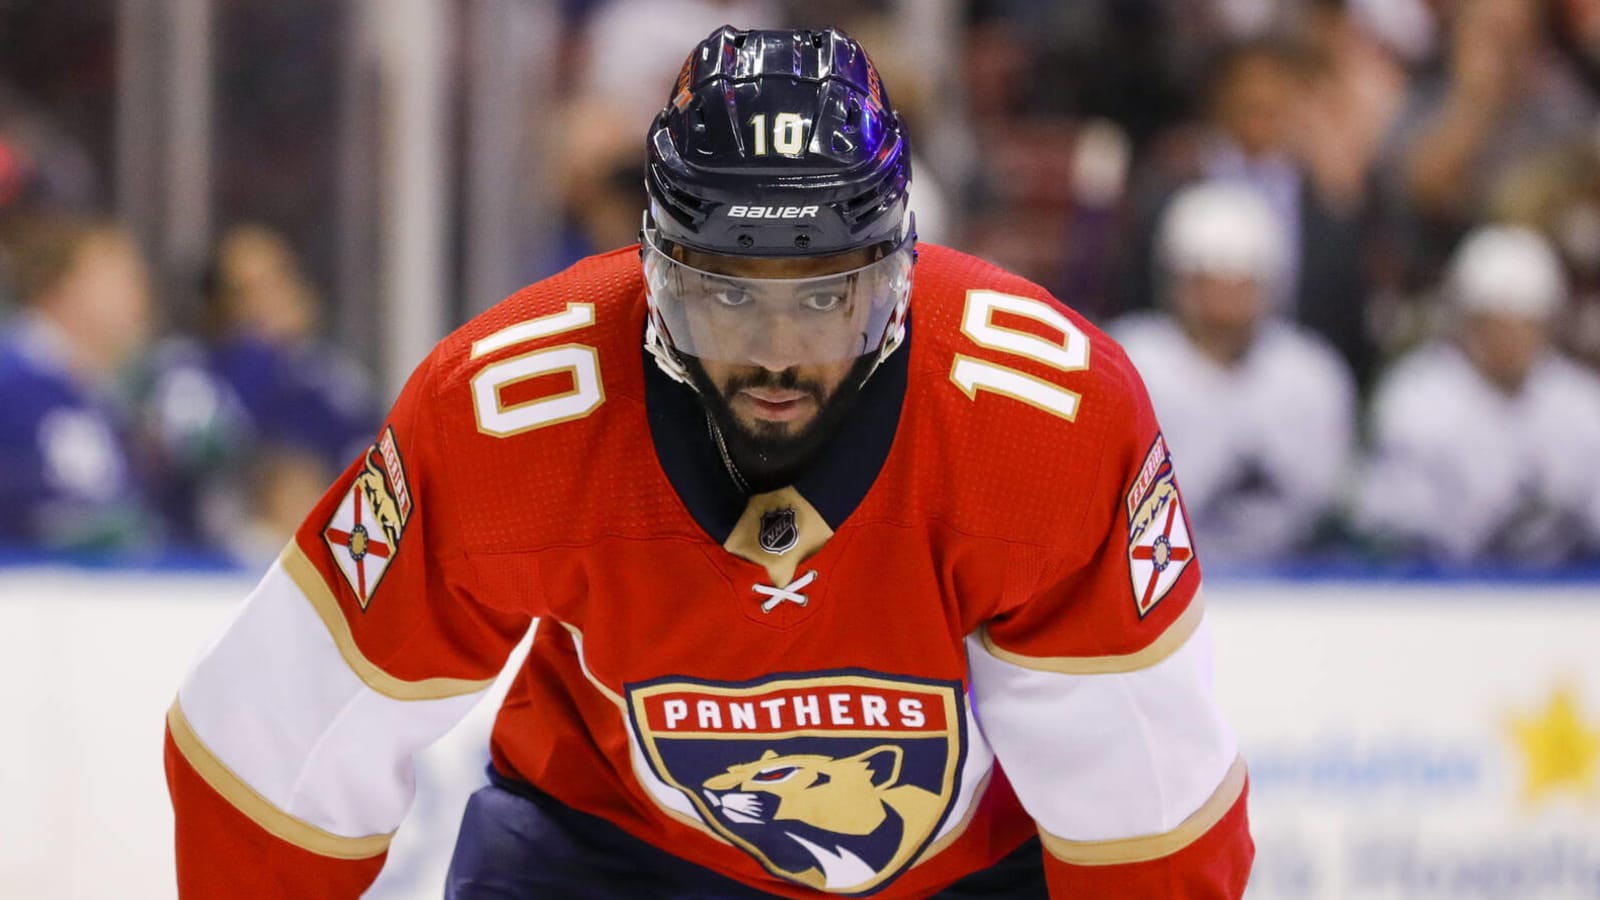 Panthers' Duclair looking at surgery for Achilles injury